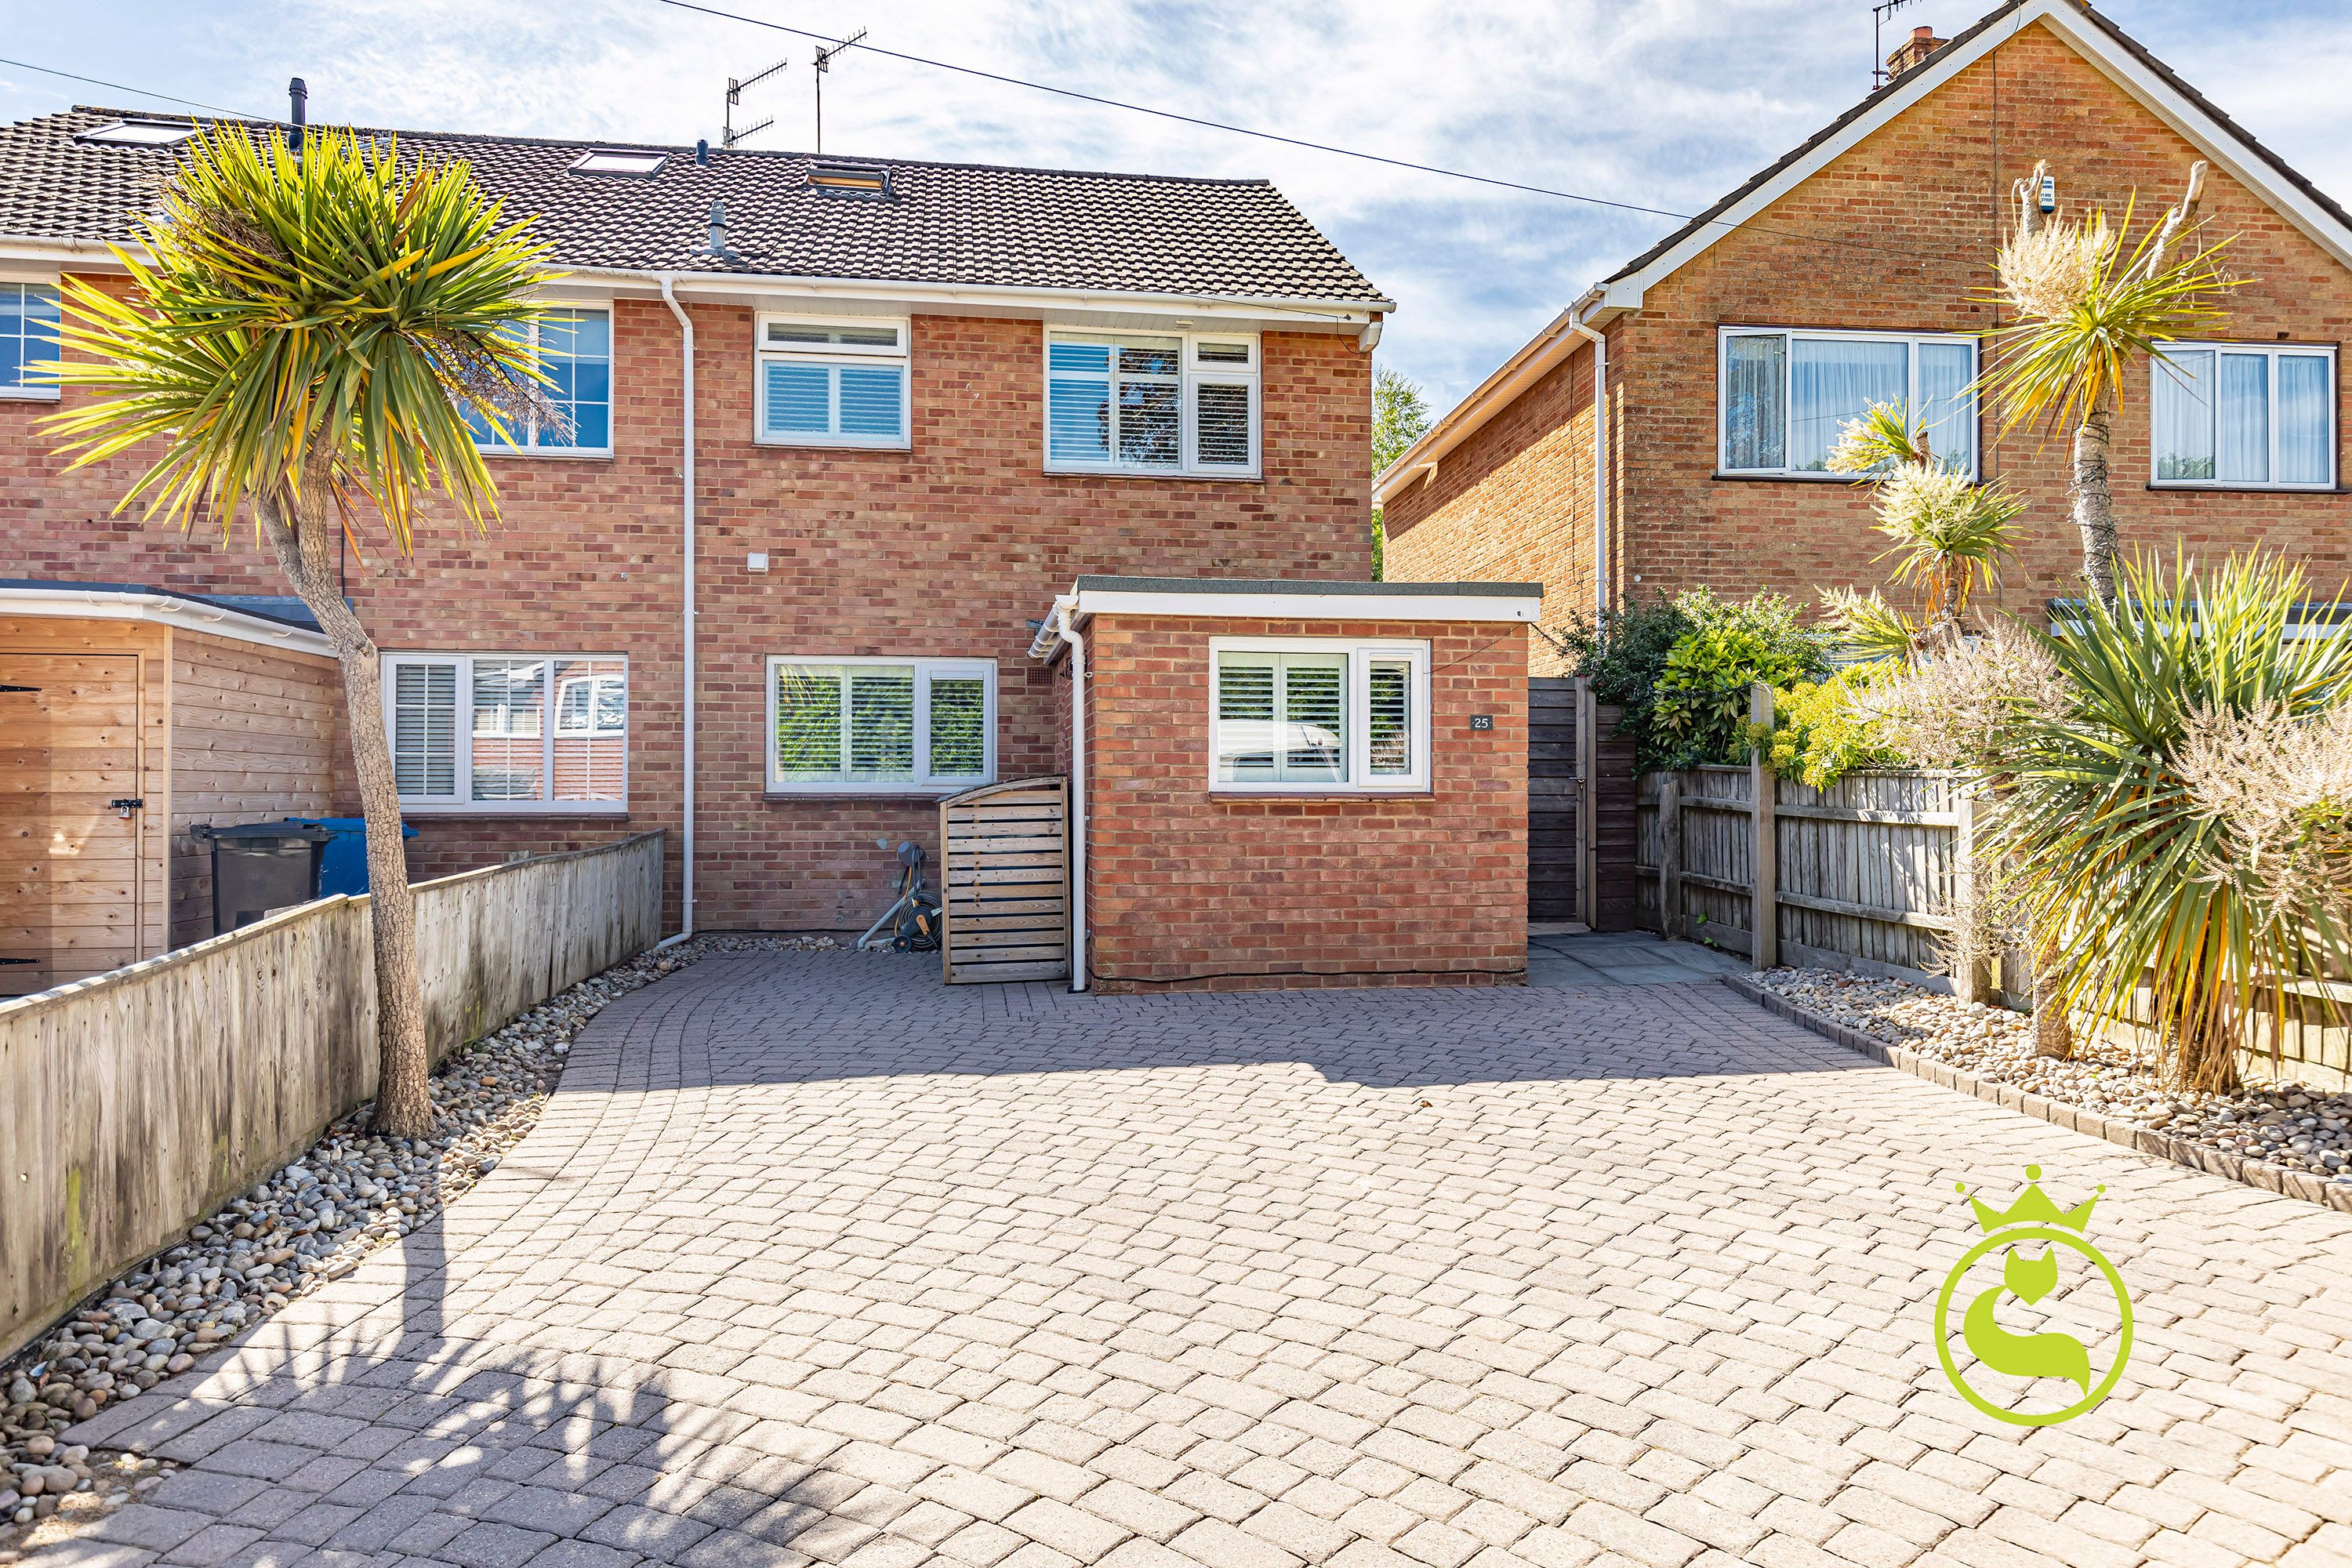 **LAUNCHING FROM SATURDAY 11TH JUNE- BY APPOINTMENT ONLY** This extended three double bedroom, three-story property has been exceptionally modernised & tastefully decorated by the current owners presenting a home you can just move straight into. Benefitting from a large rear Westerly facing garden, garden office/bar/workshop and plenty of parking.